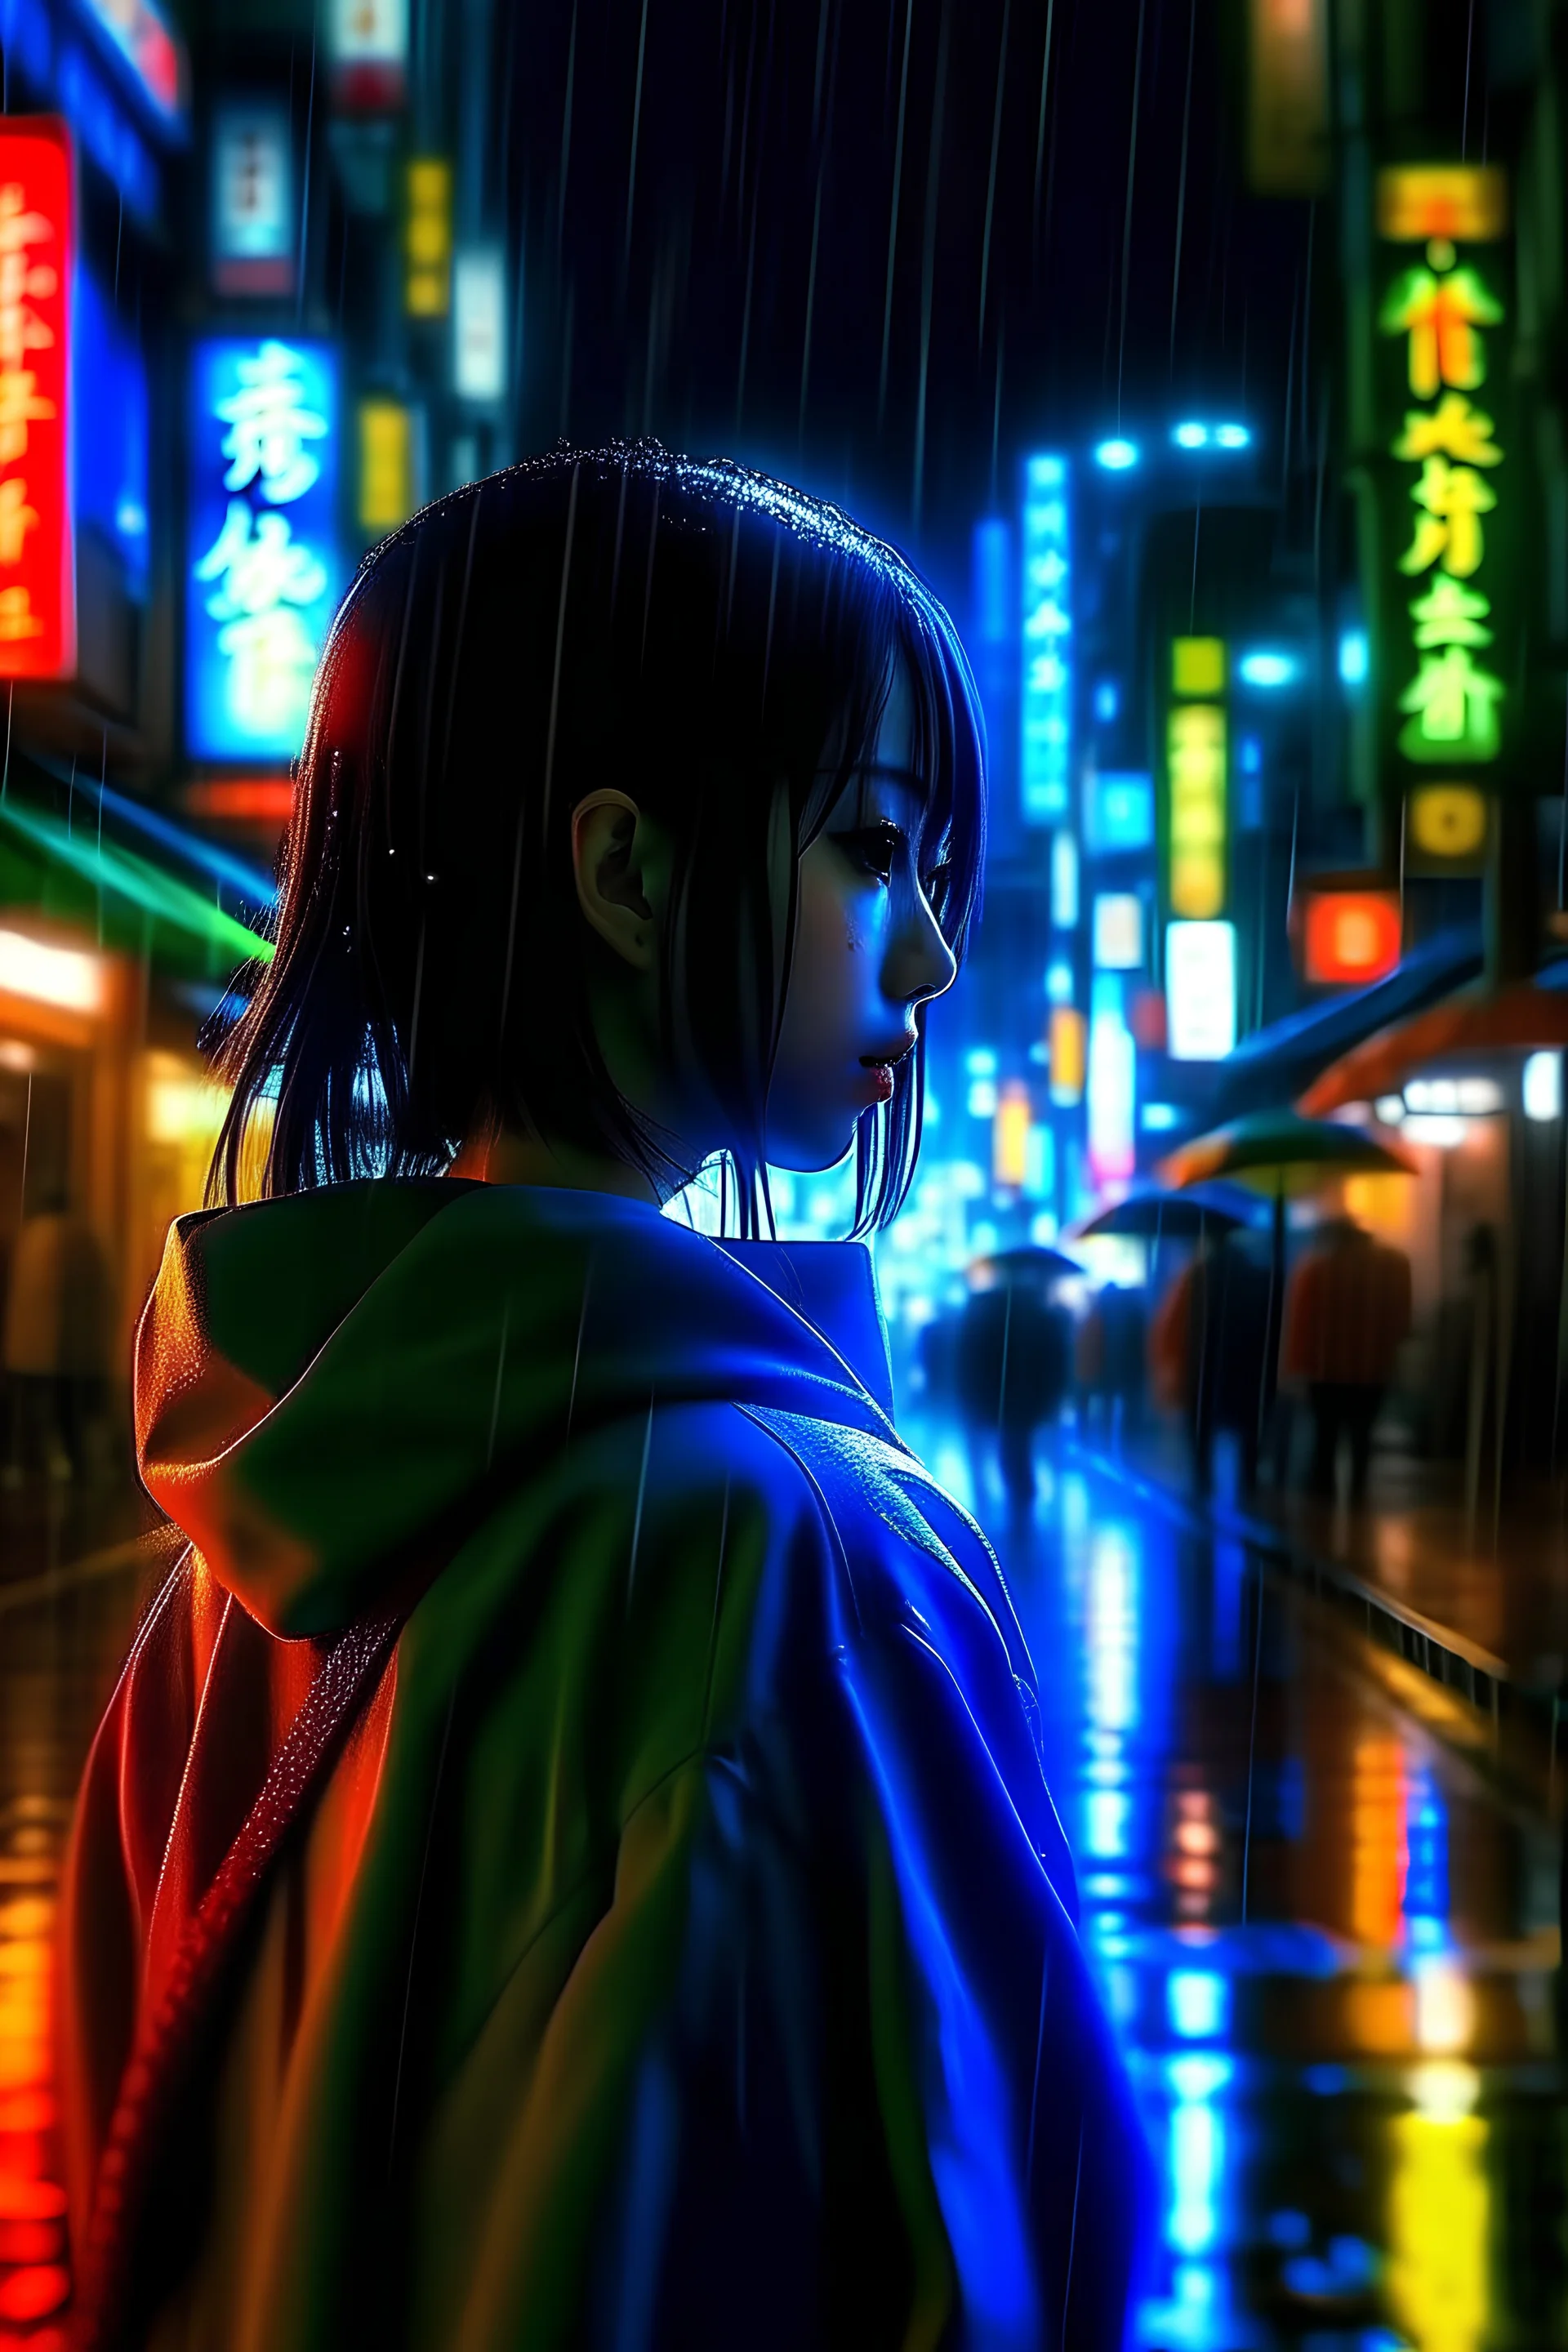 Anime girl in tokyo rainy night with neon lights from her back point of view